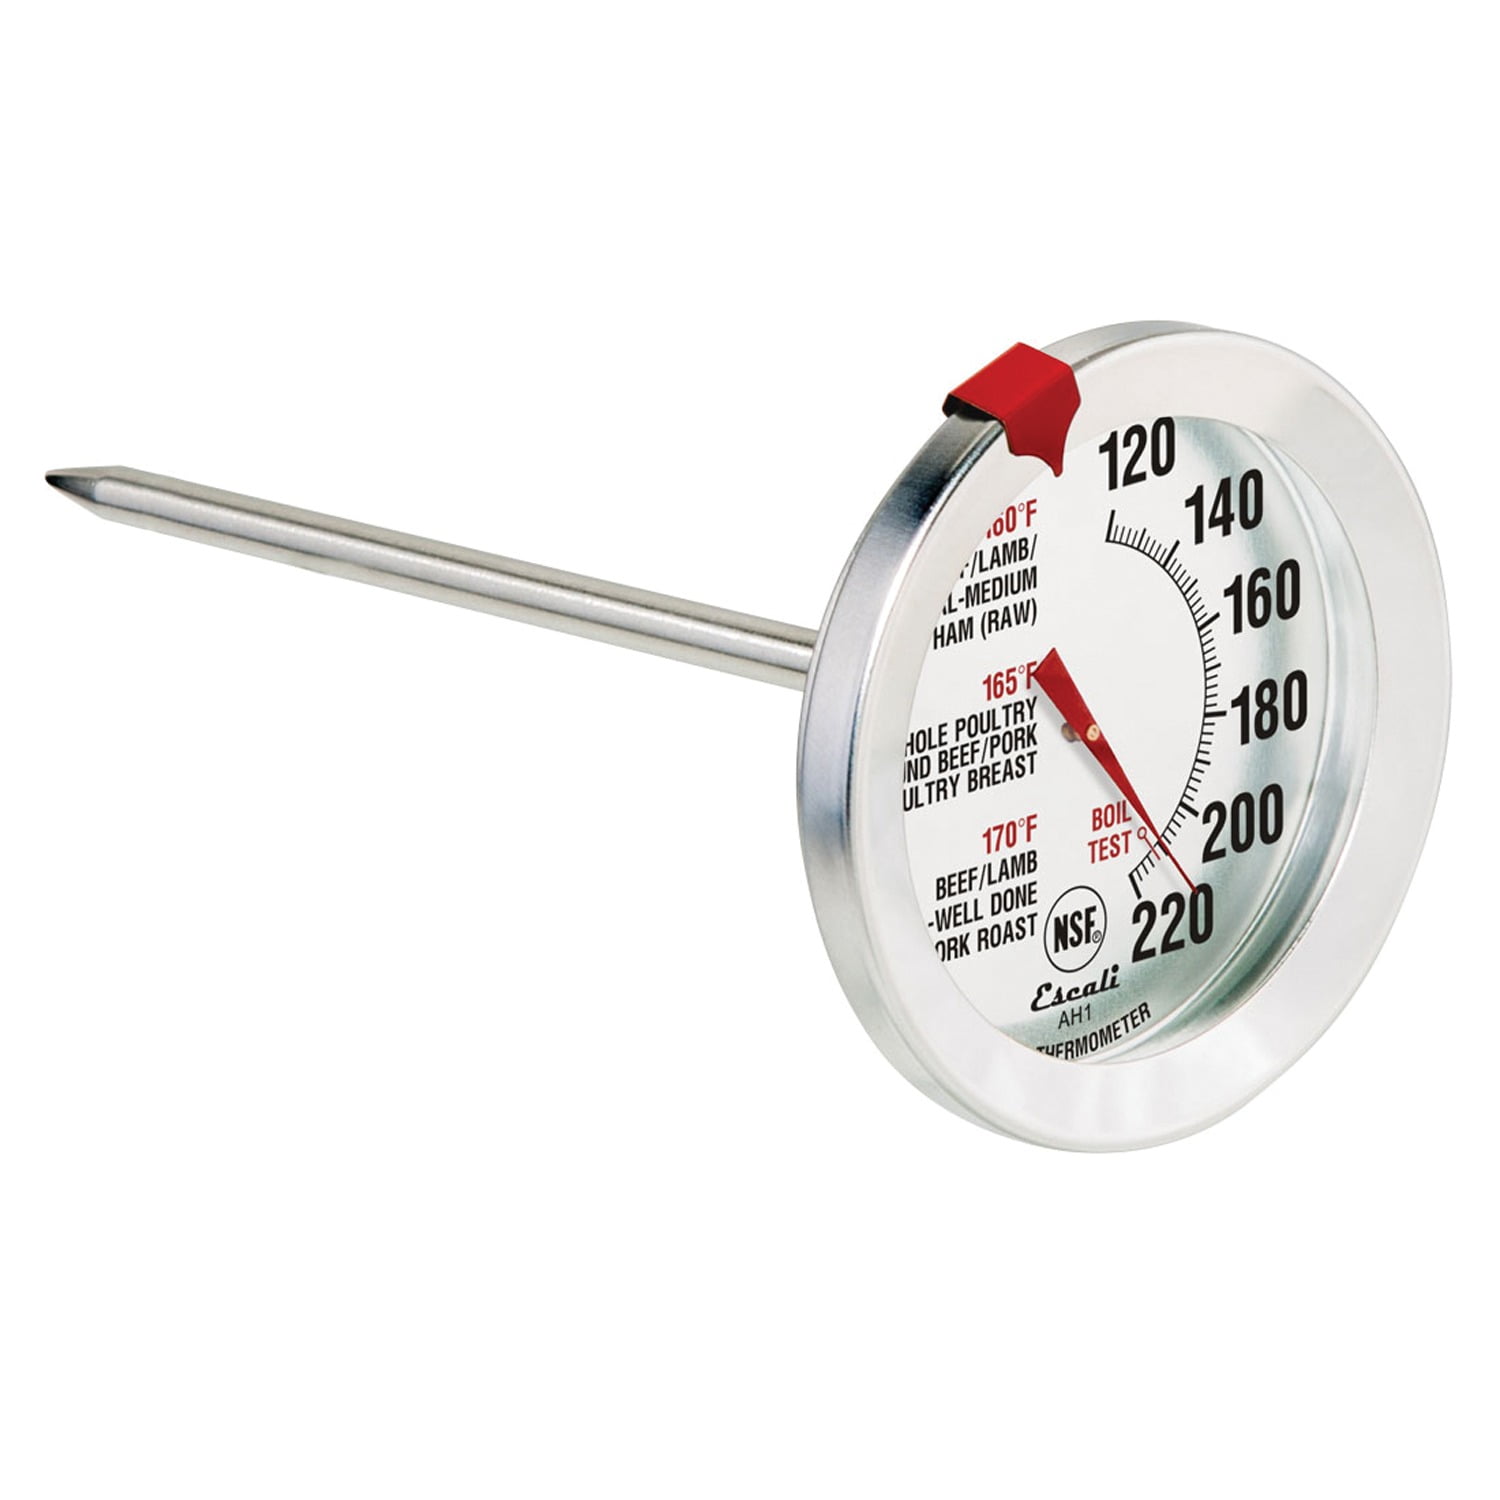 Cdn Irm200-Glow Proaccurate Meat/Poultry Oven Thermometer-Extra Large Glow-In 